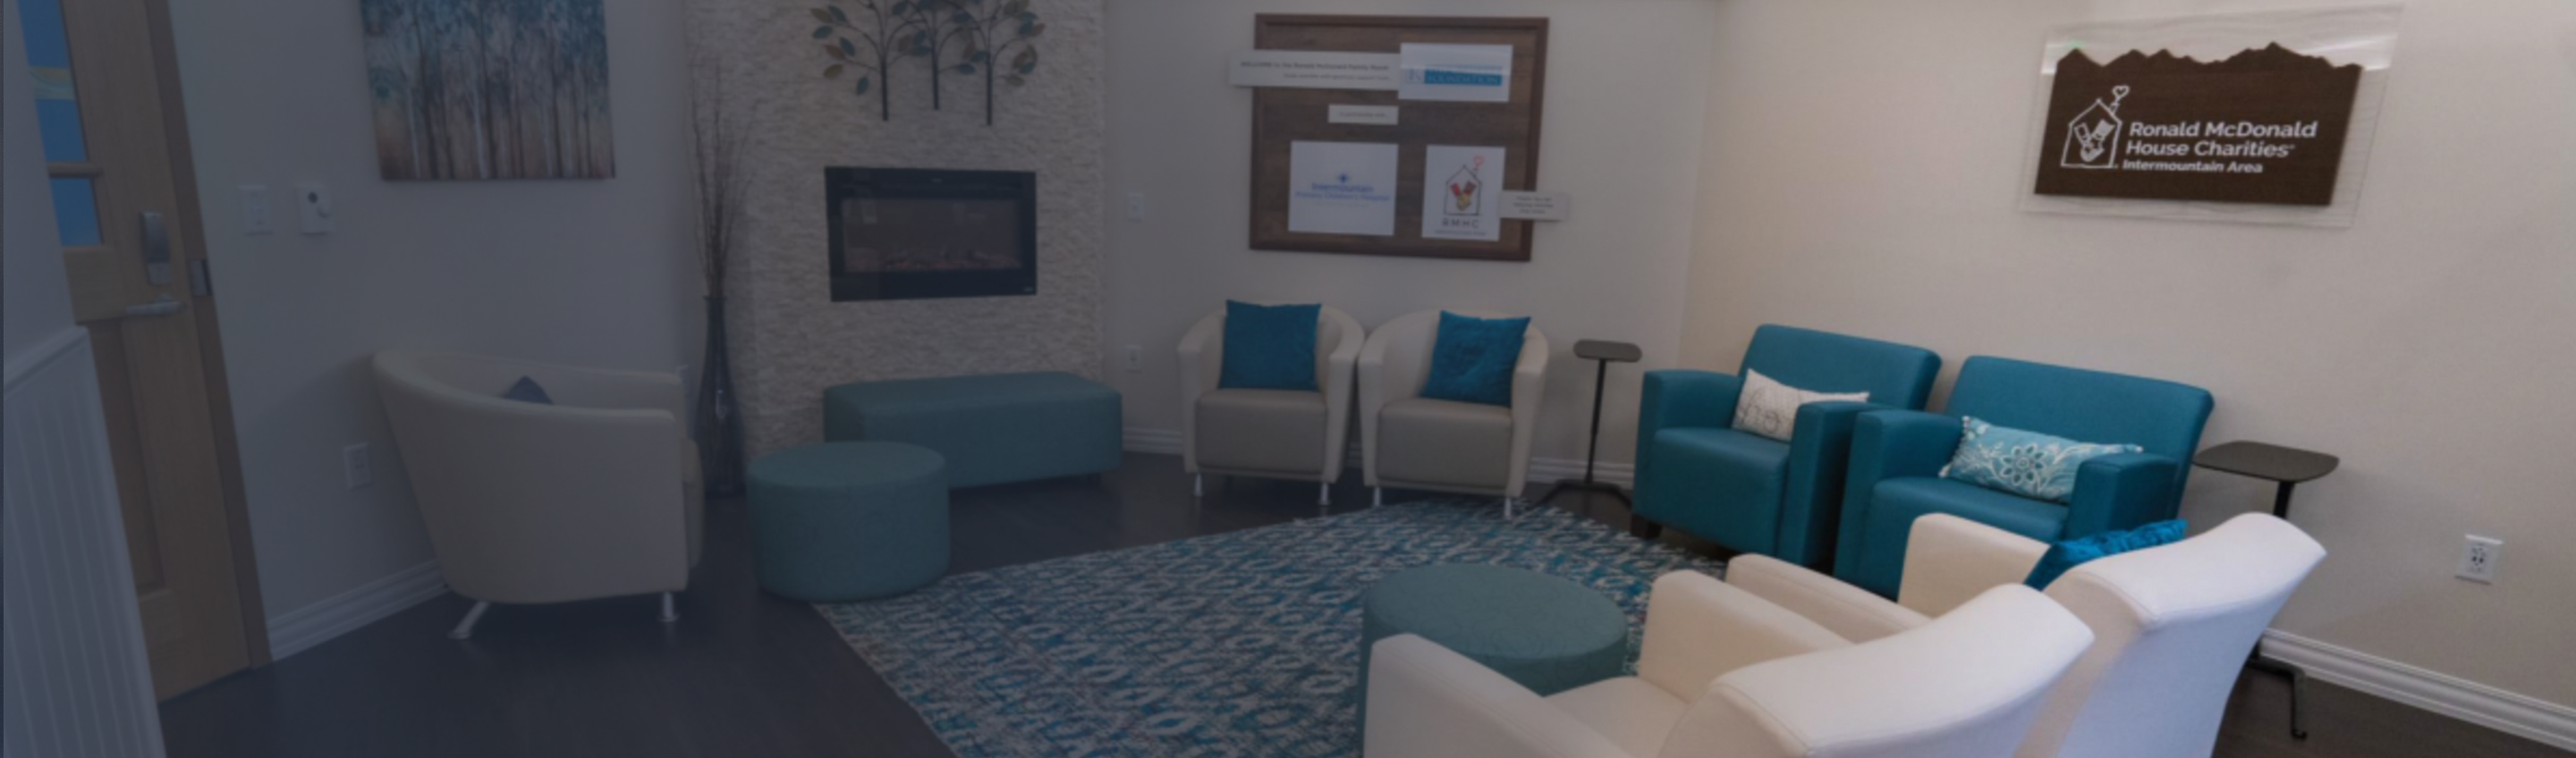 A hospital's Ronald McDonald Family Room sitting room, counter clockwise from the bottom, alternating pairs of white and teal armchairs, a settee and ottoman pair, and a lone white armchair circle 3 sides of a teal, patterned rug